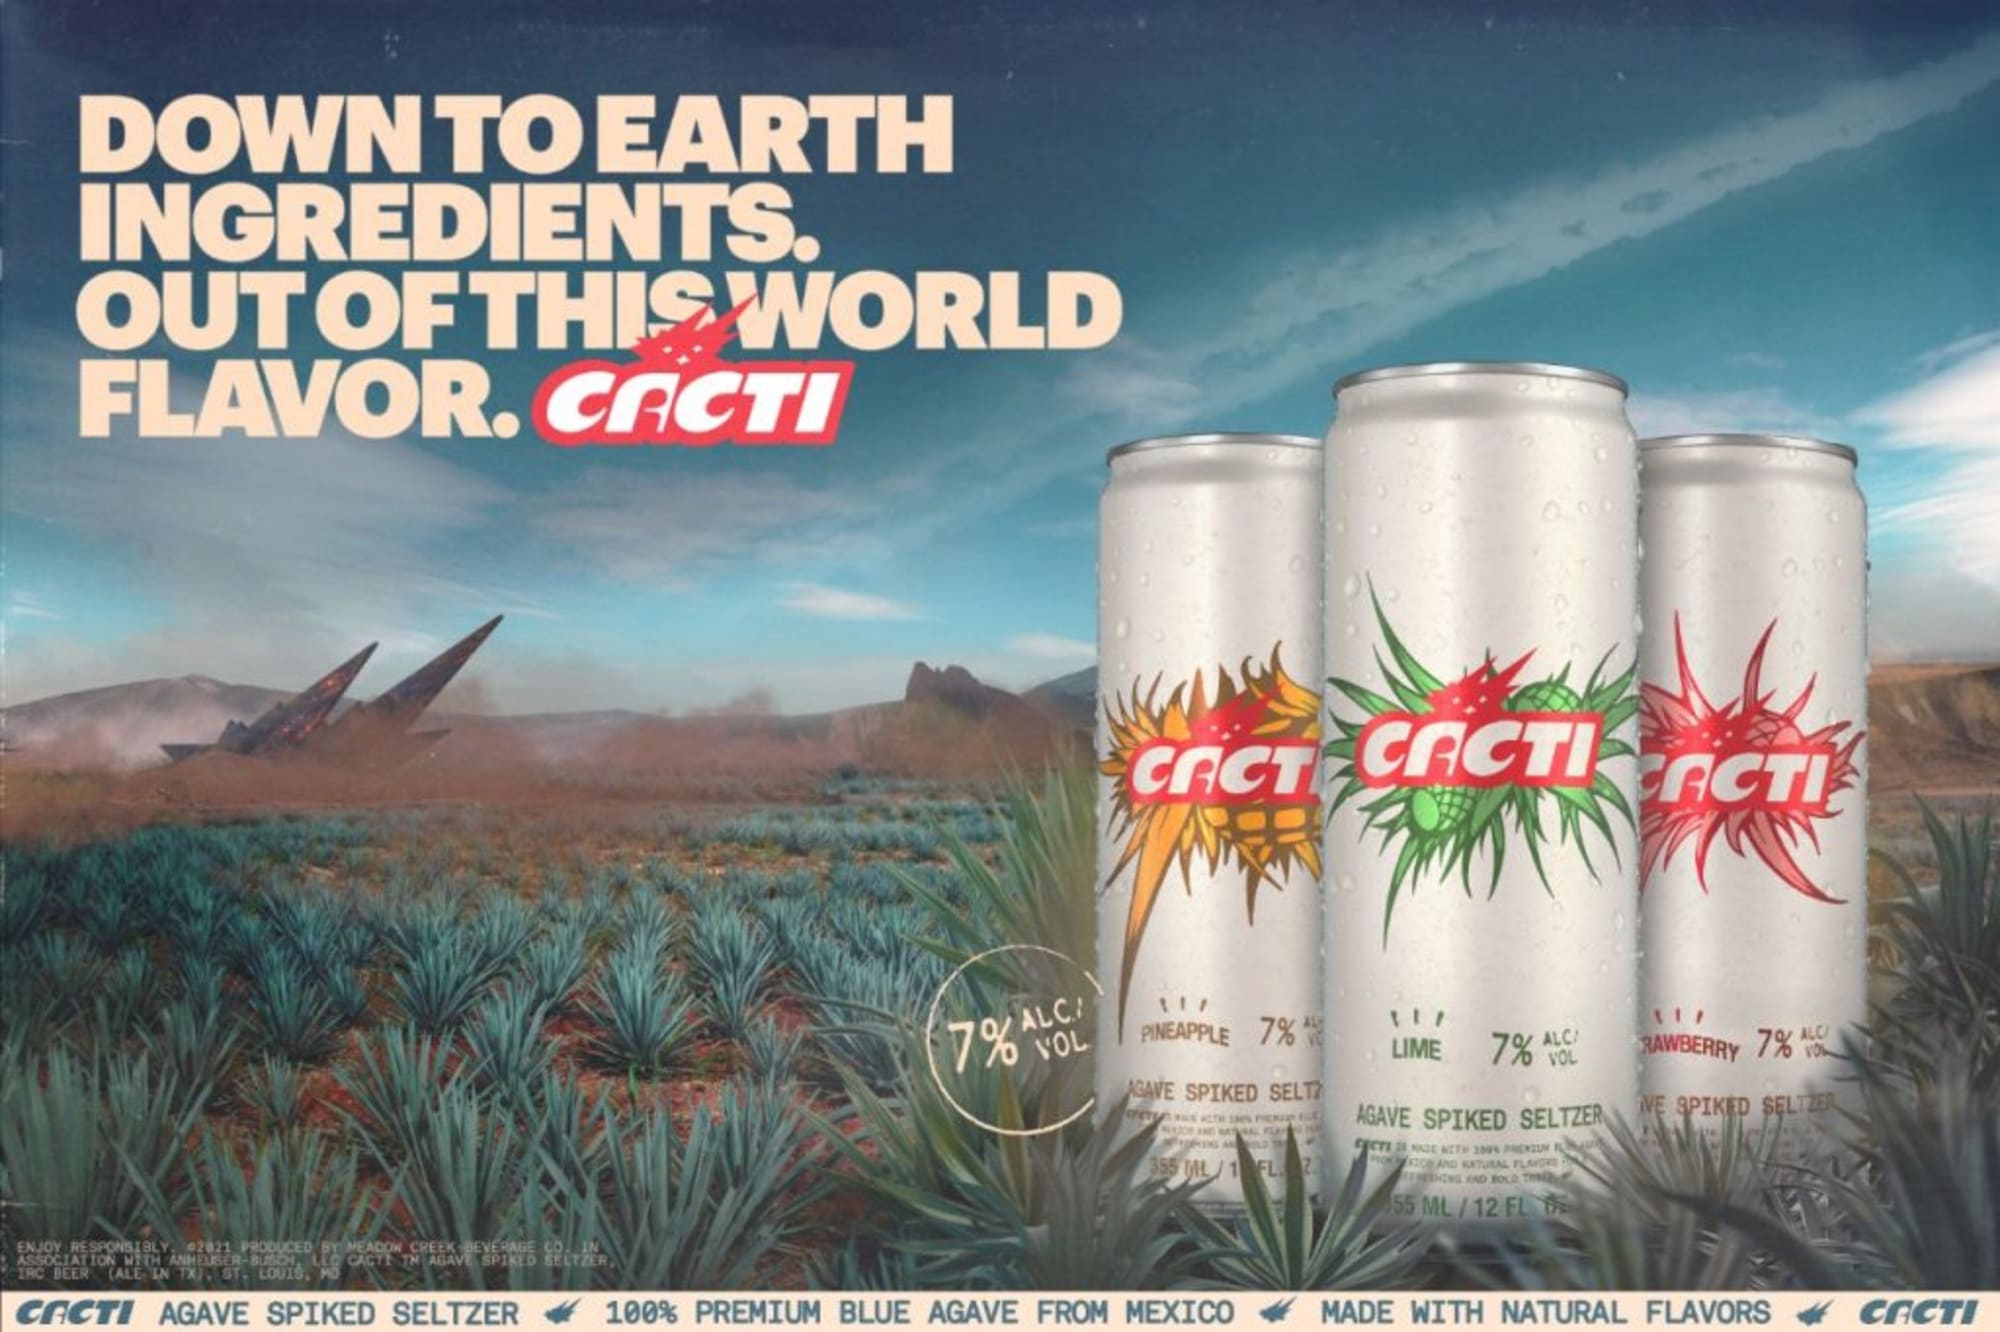 CACTI Agave Spiked Seltzer hits shelves with a Travis Scott creative spin